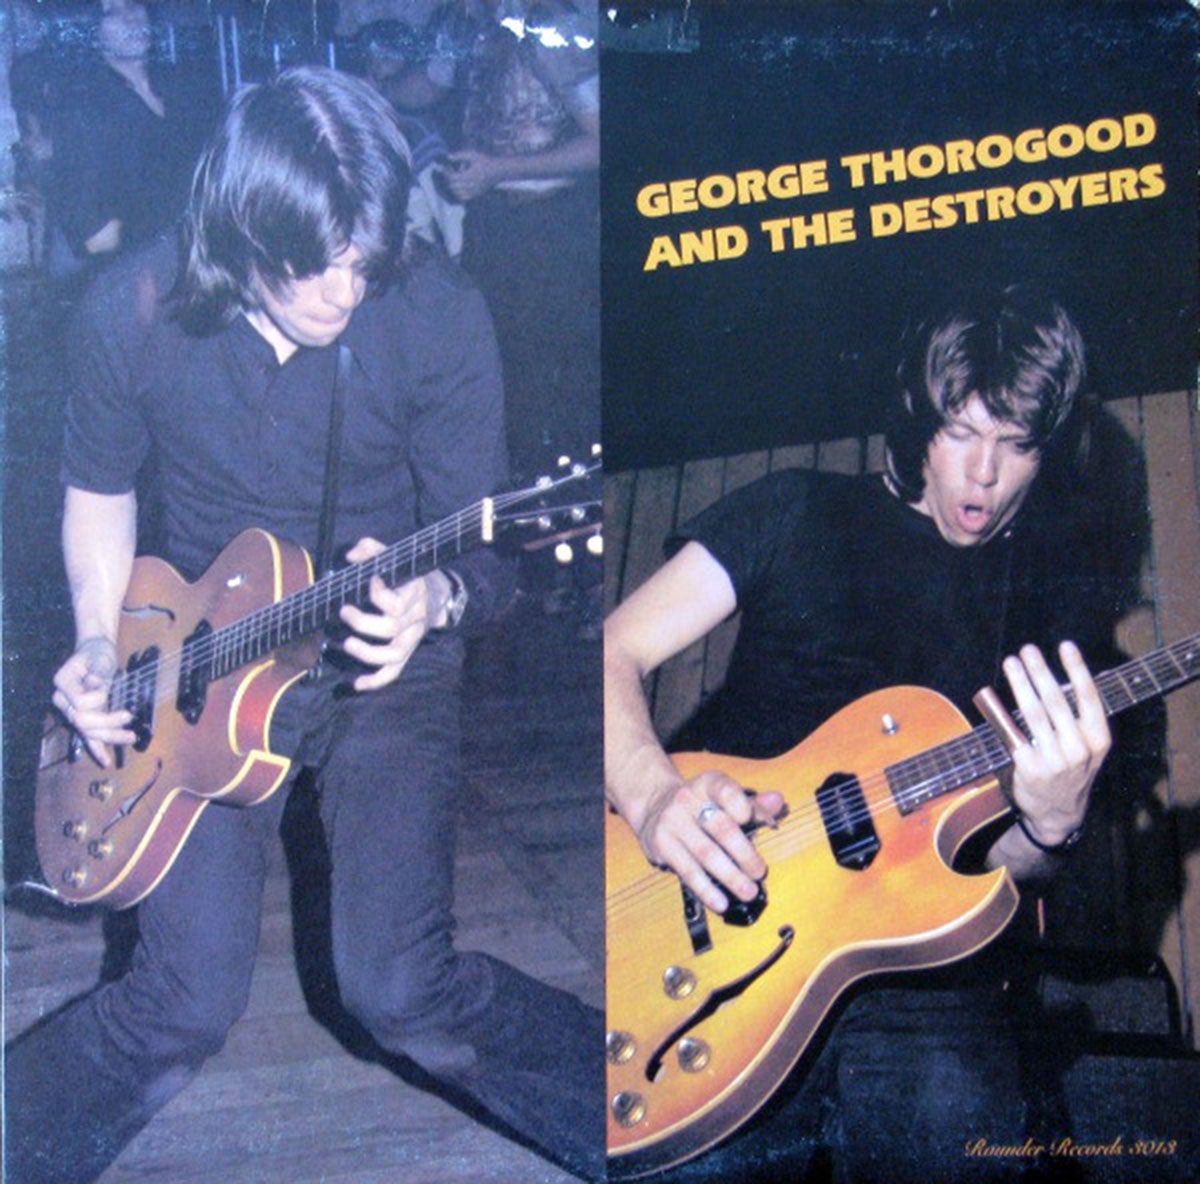 George Thorogood And The Destroyers ‎– George Thorogood And The Destroyers